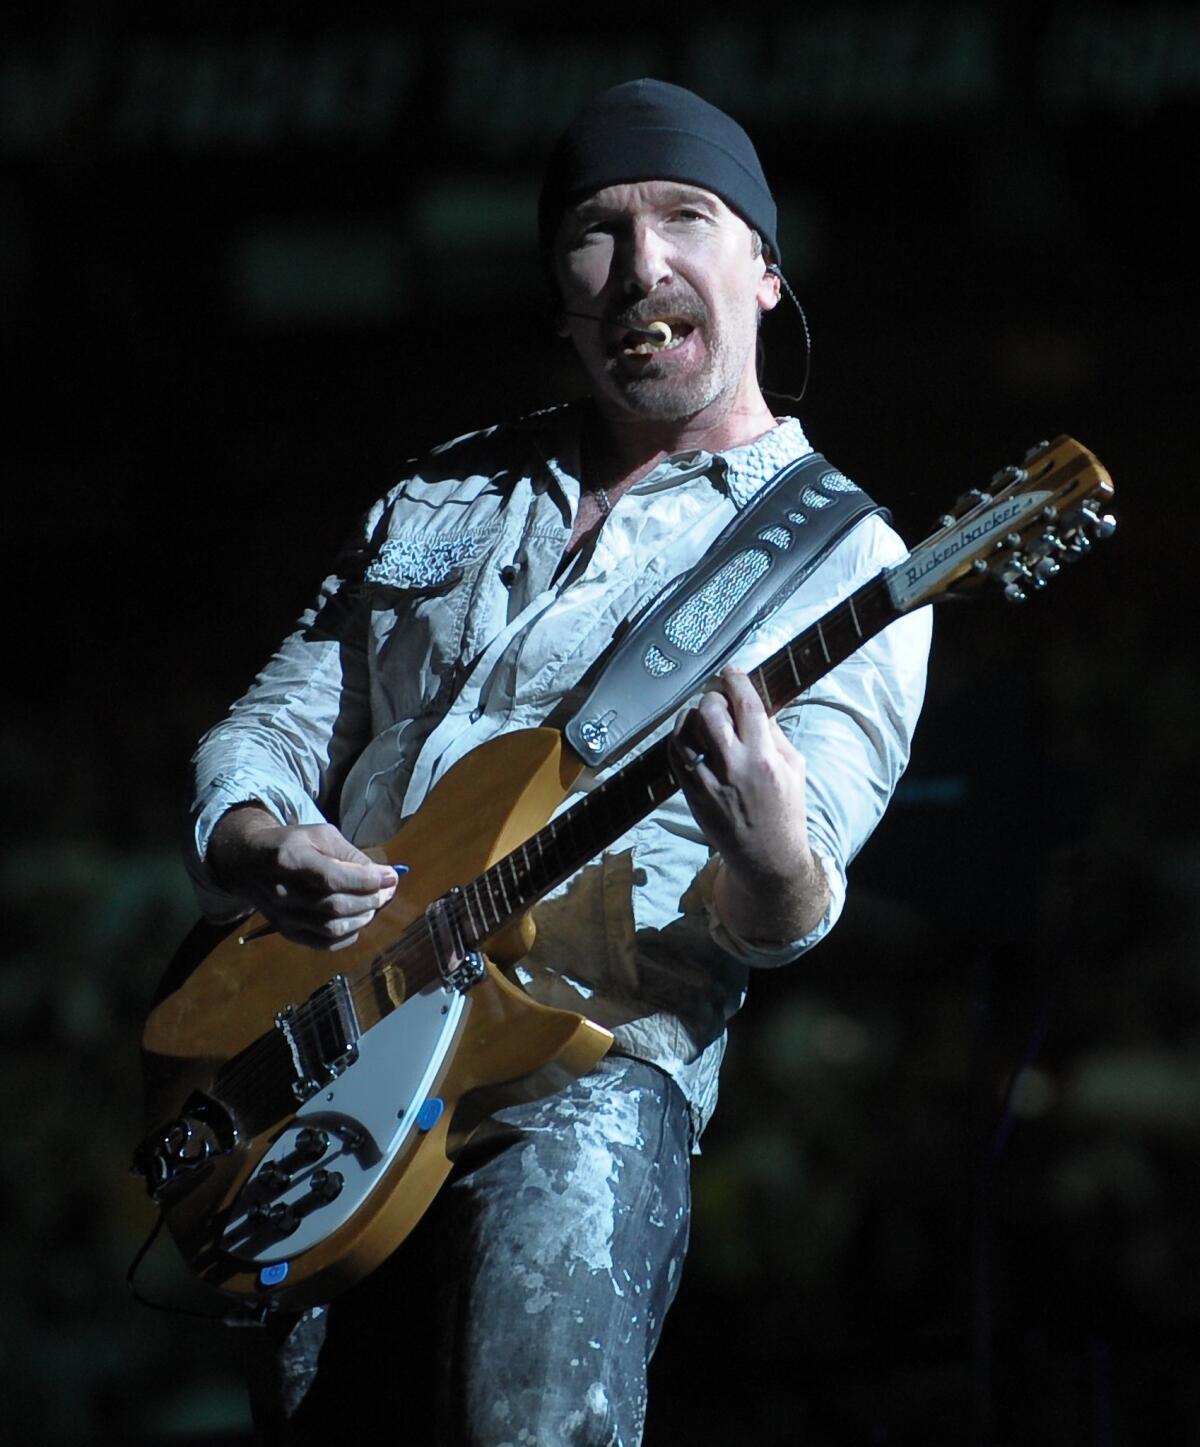 The Edge, also known as David Evans.